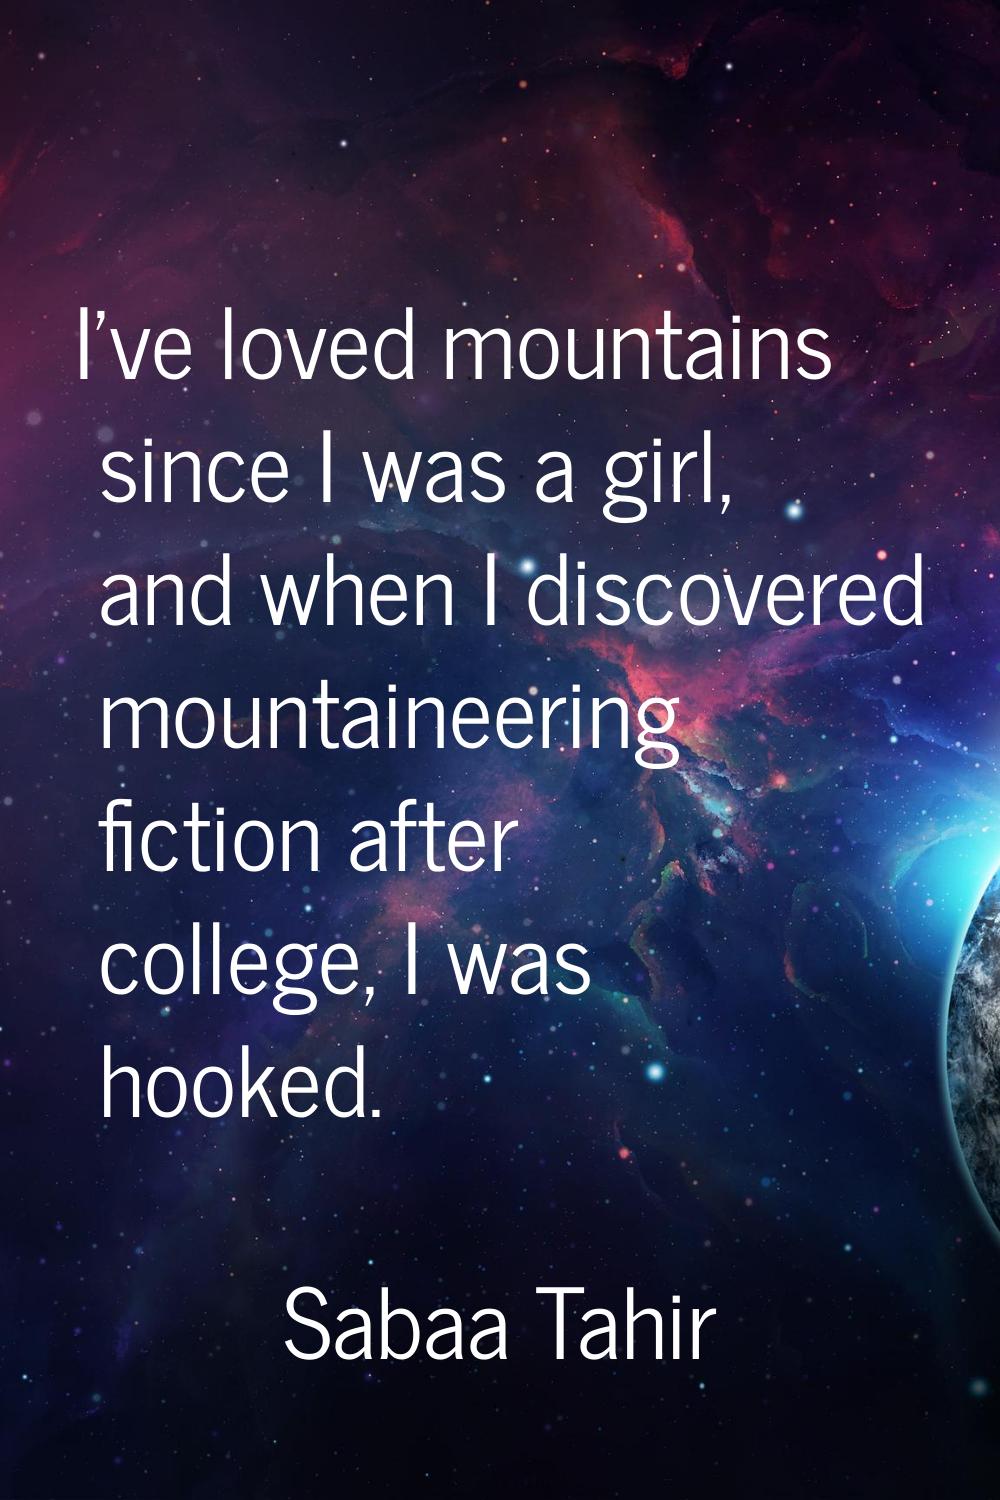 I've loved mountains since I was a girl, and when I discovered mountaineering fiction after college